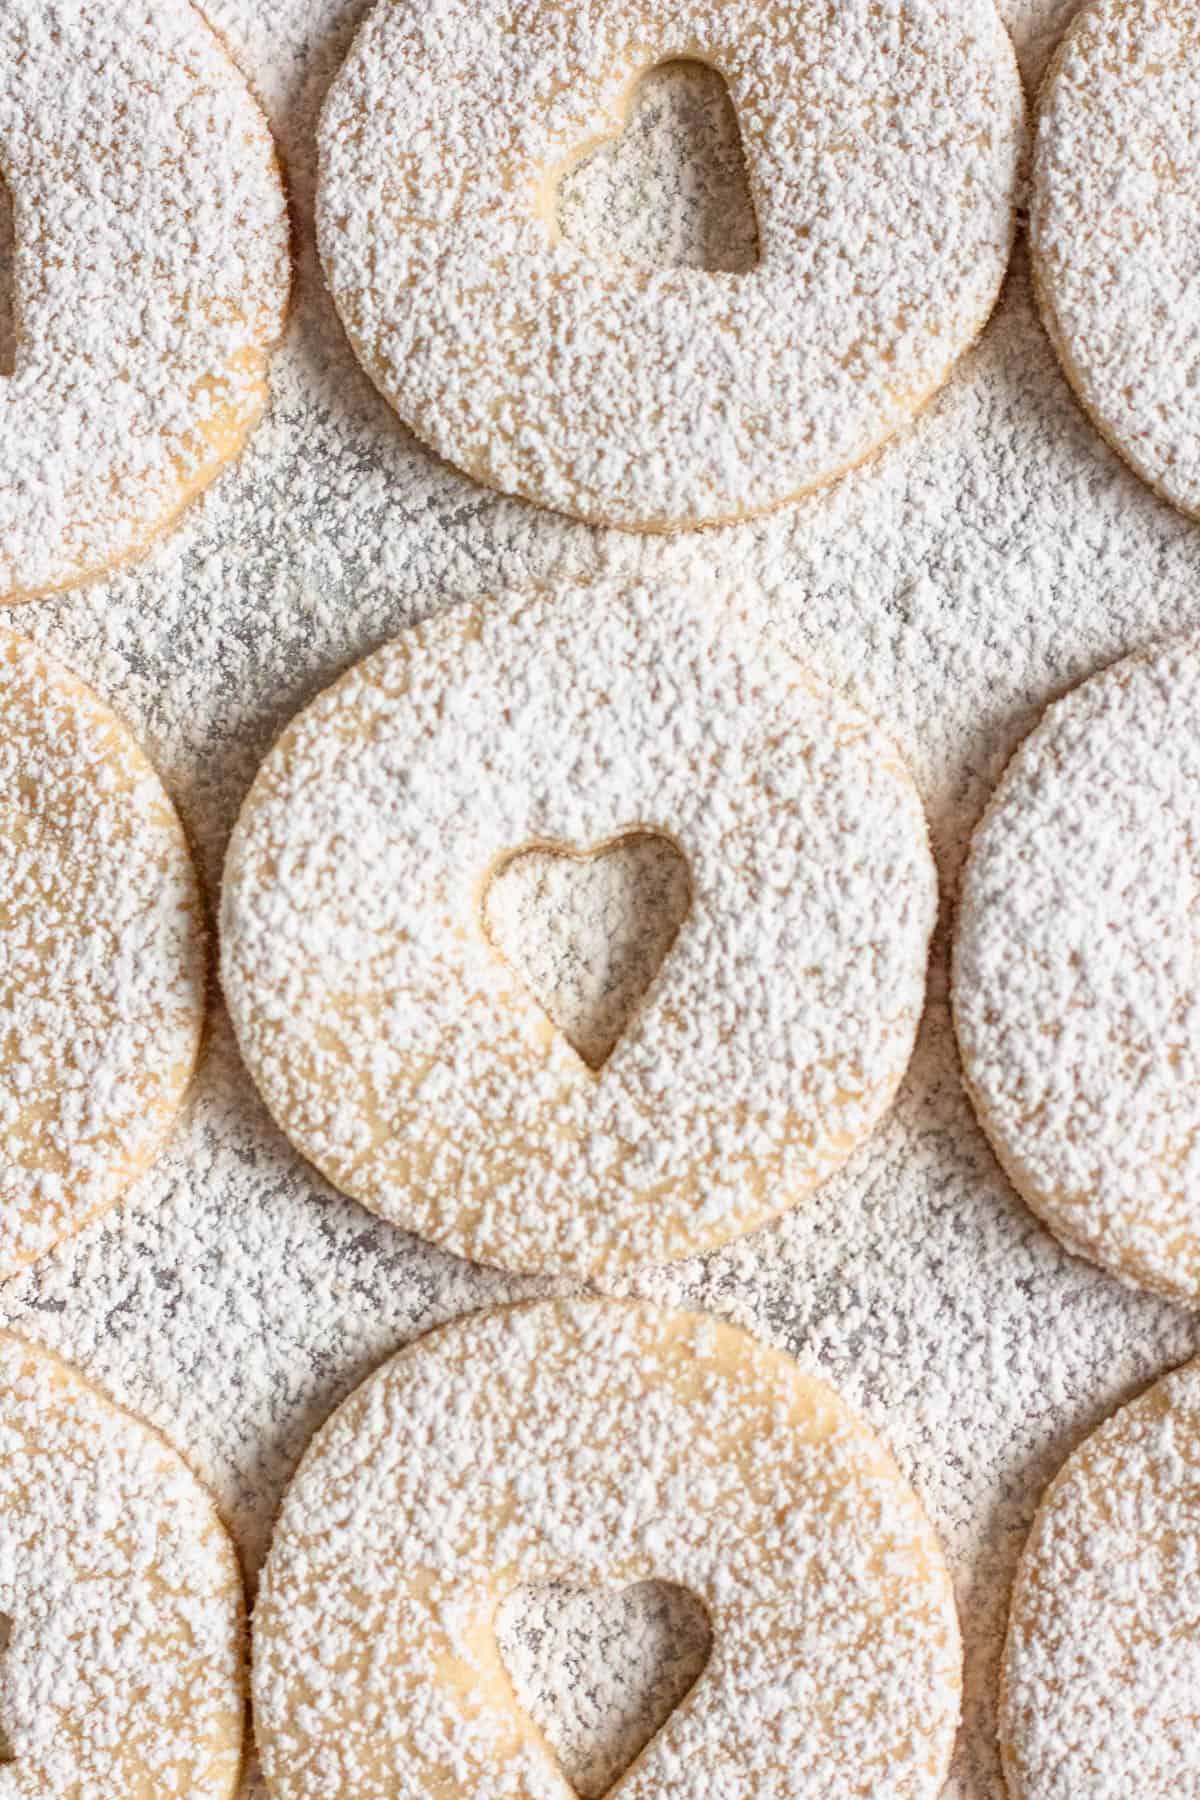 Powdered sugar sprinkled over shortbread cookies with jam. 